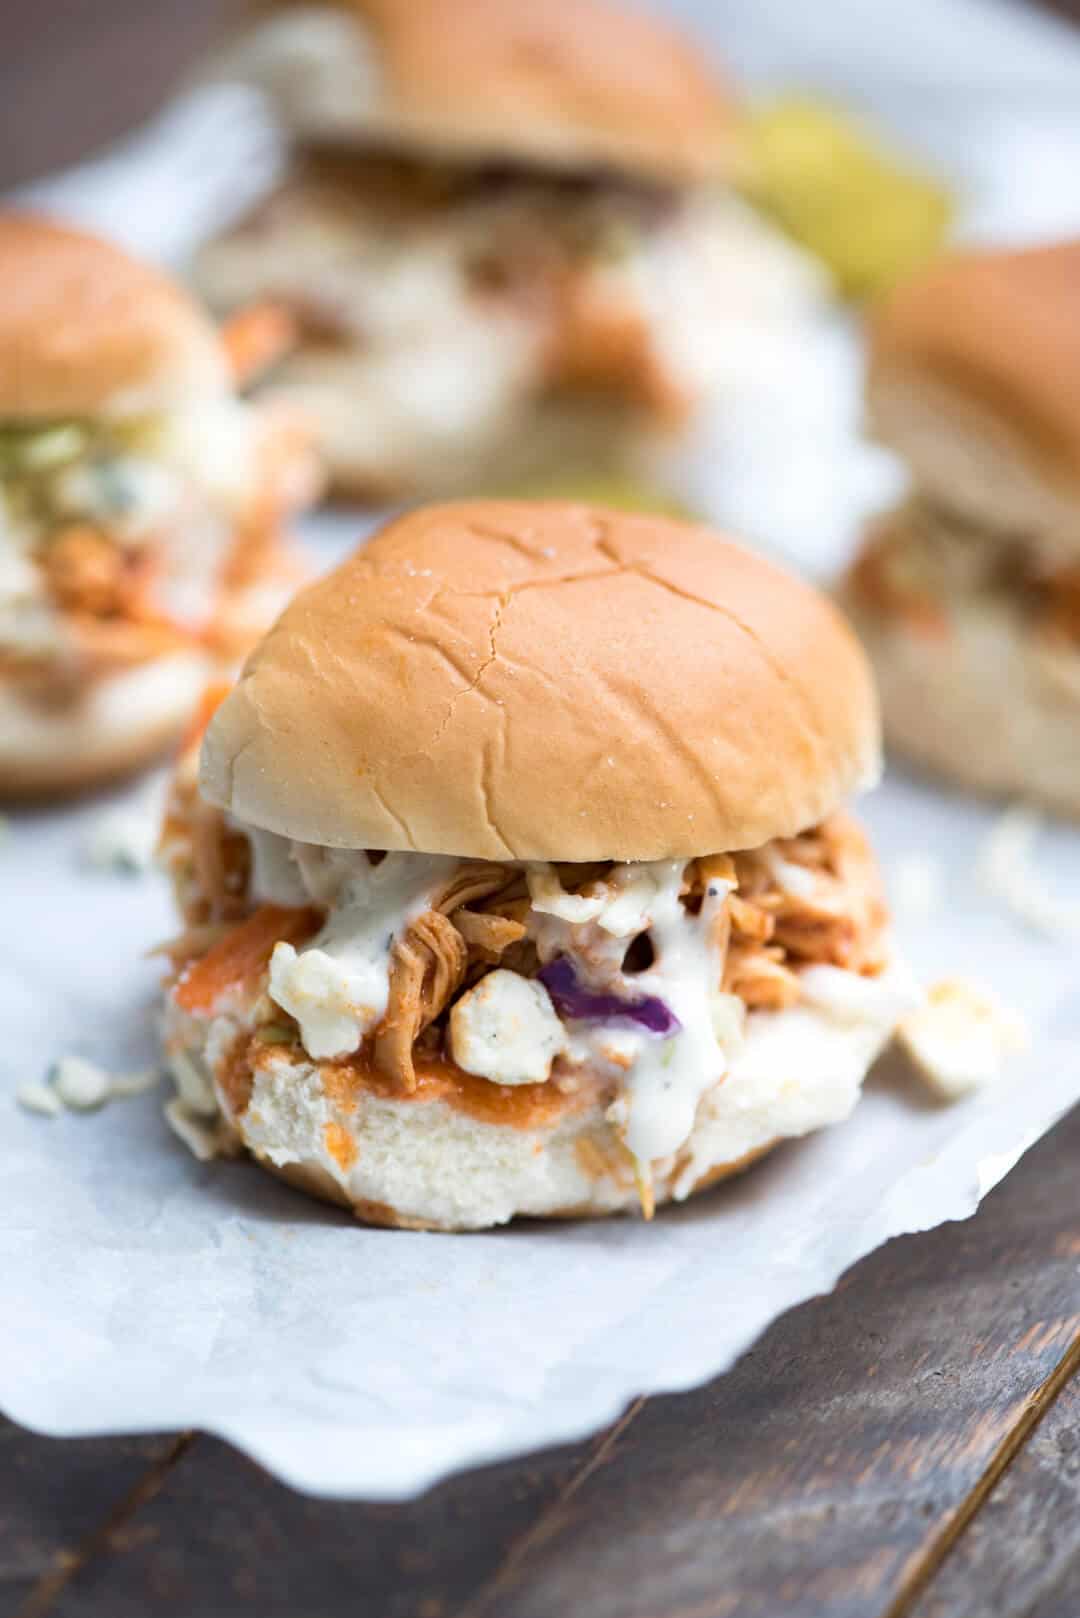 A BBQ Buffalo Chicken Slider with Ranch Dressing and Blue Cheese.